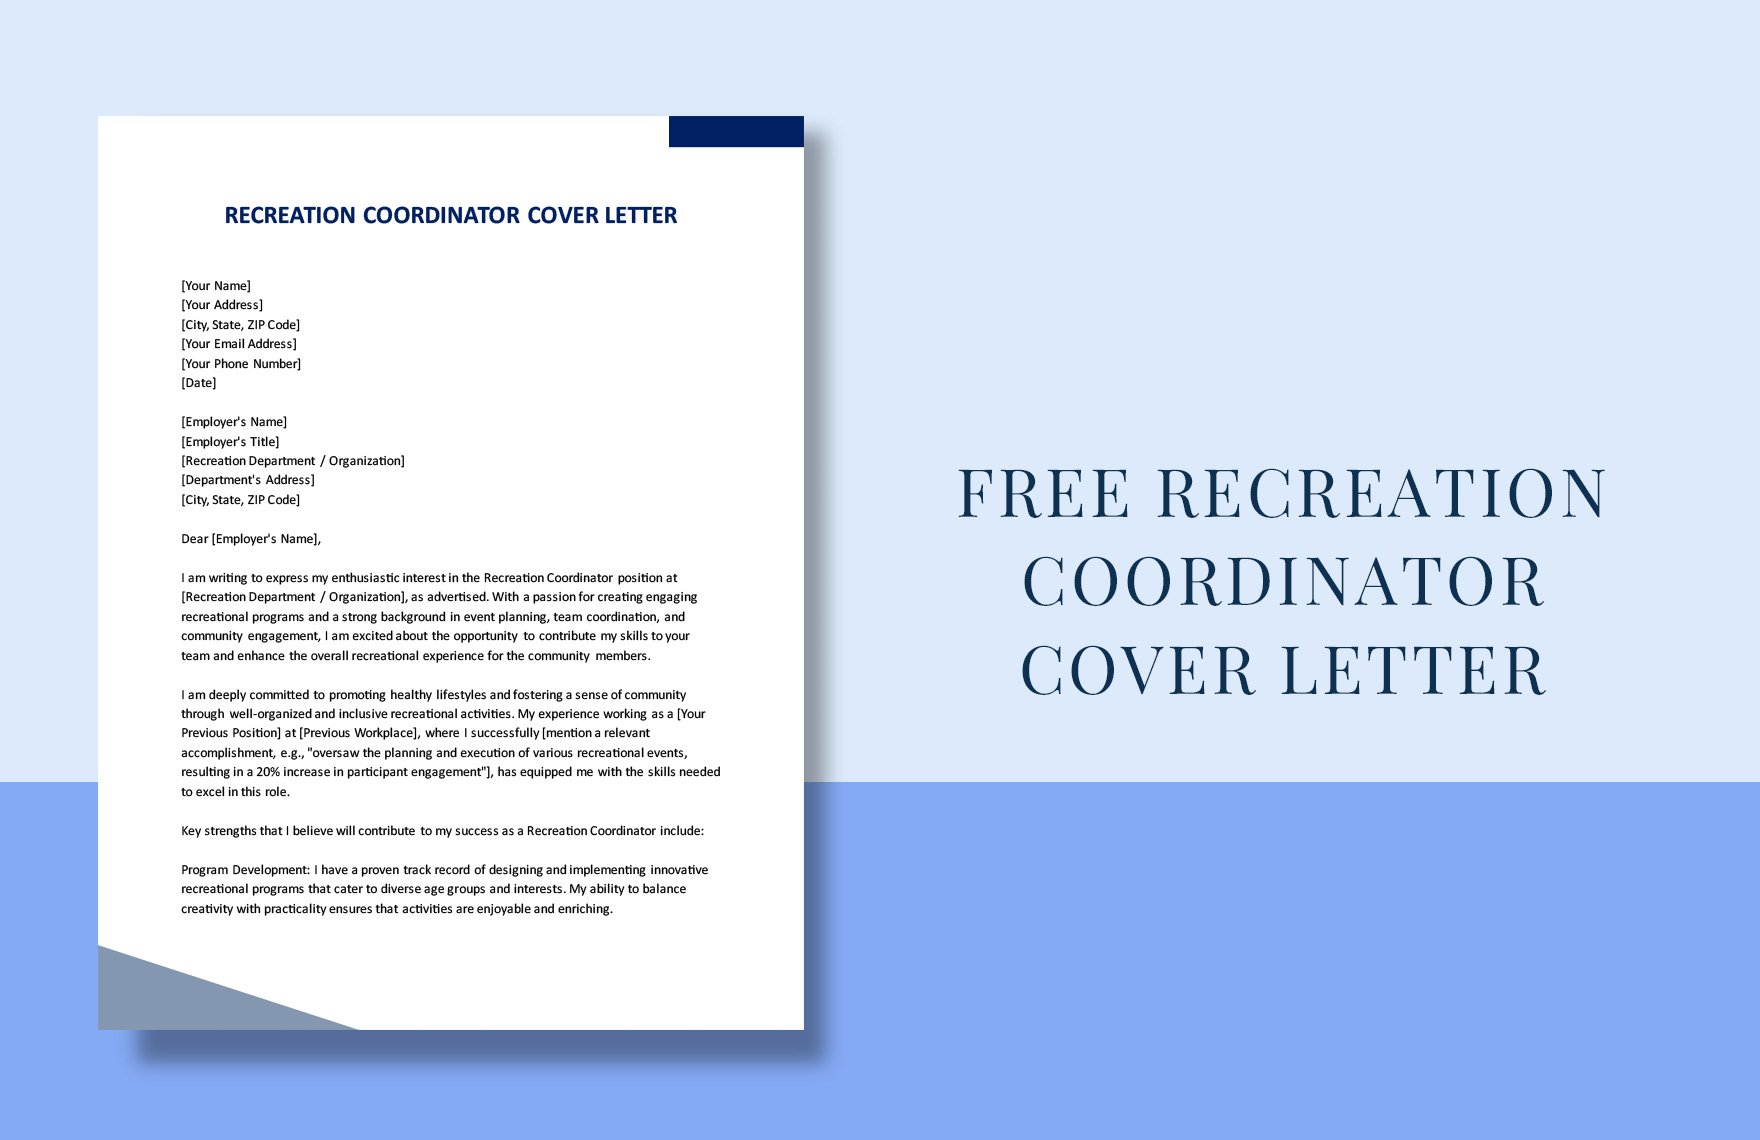 Free Recreation Coordinator Cover Letter in Word, Google Docs, PDF